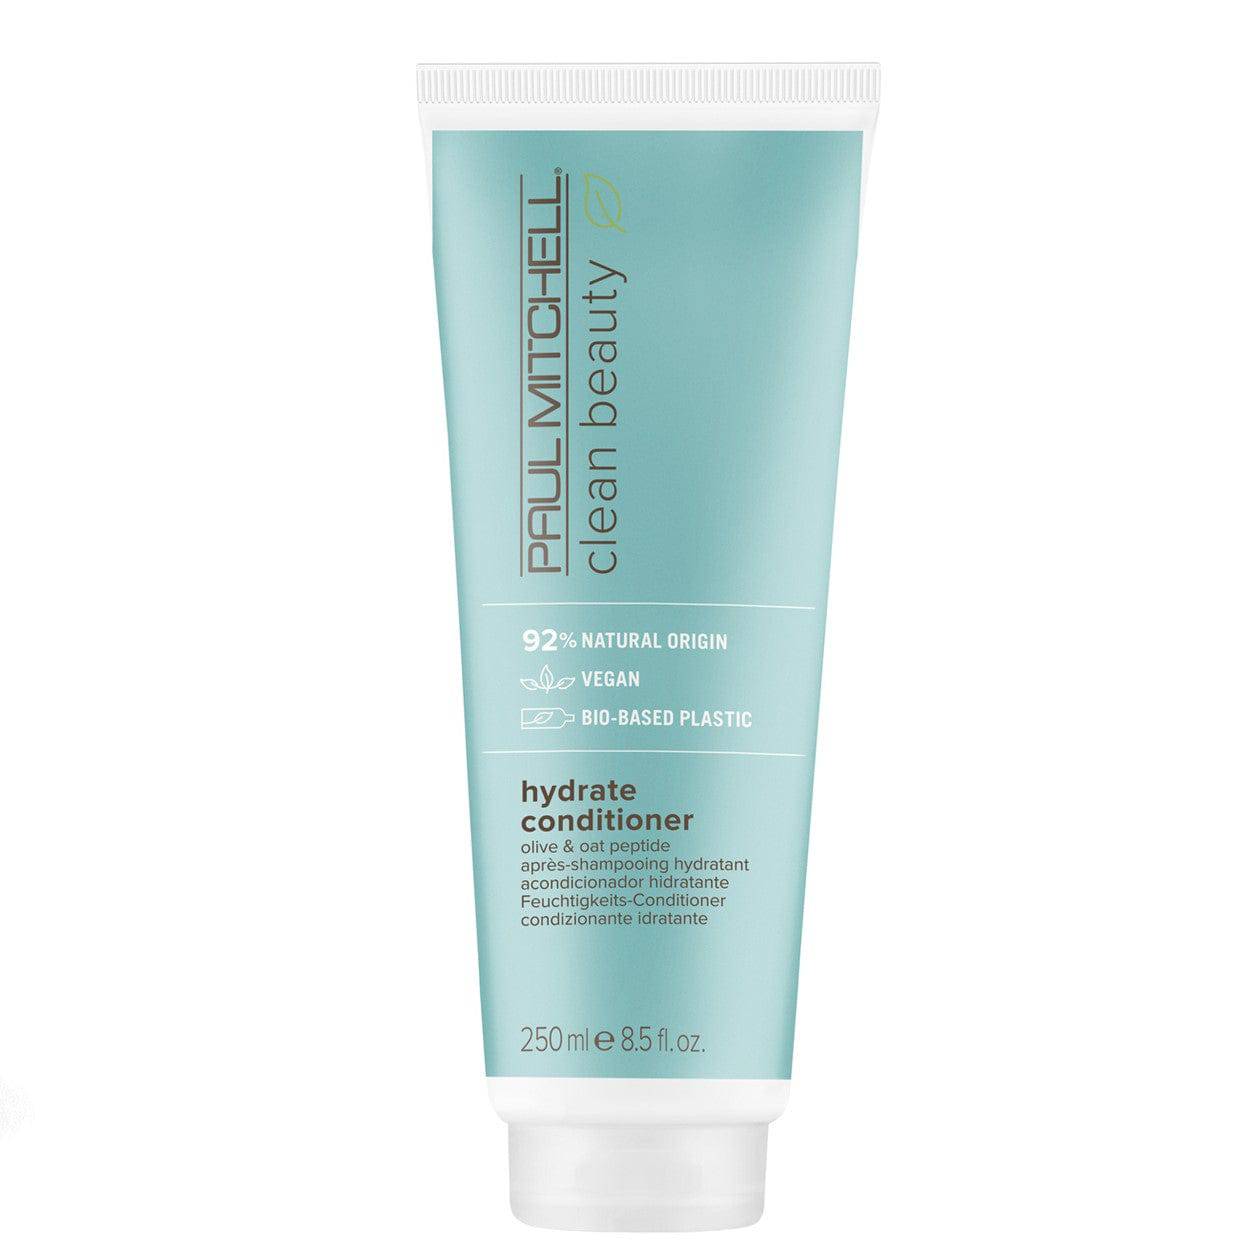 Paul Mitchell Clean Beauty Hydrate Conditioner 250ml - On Line Hair Depot